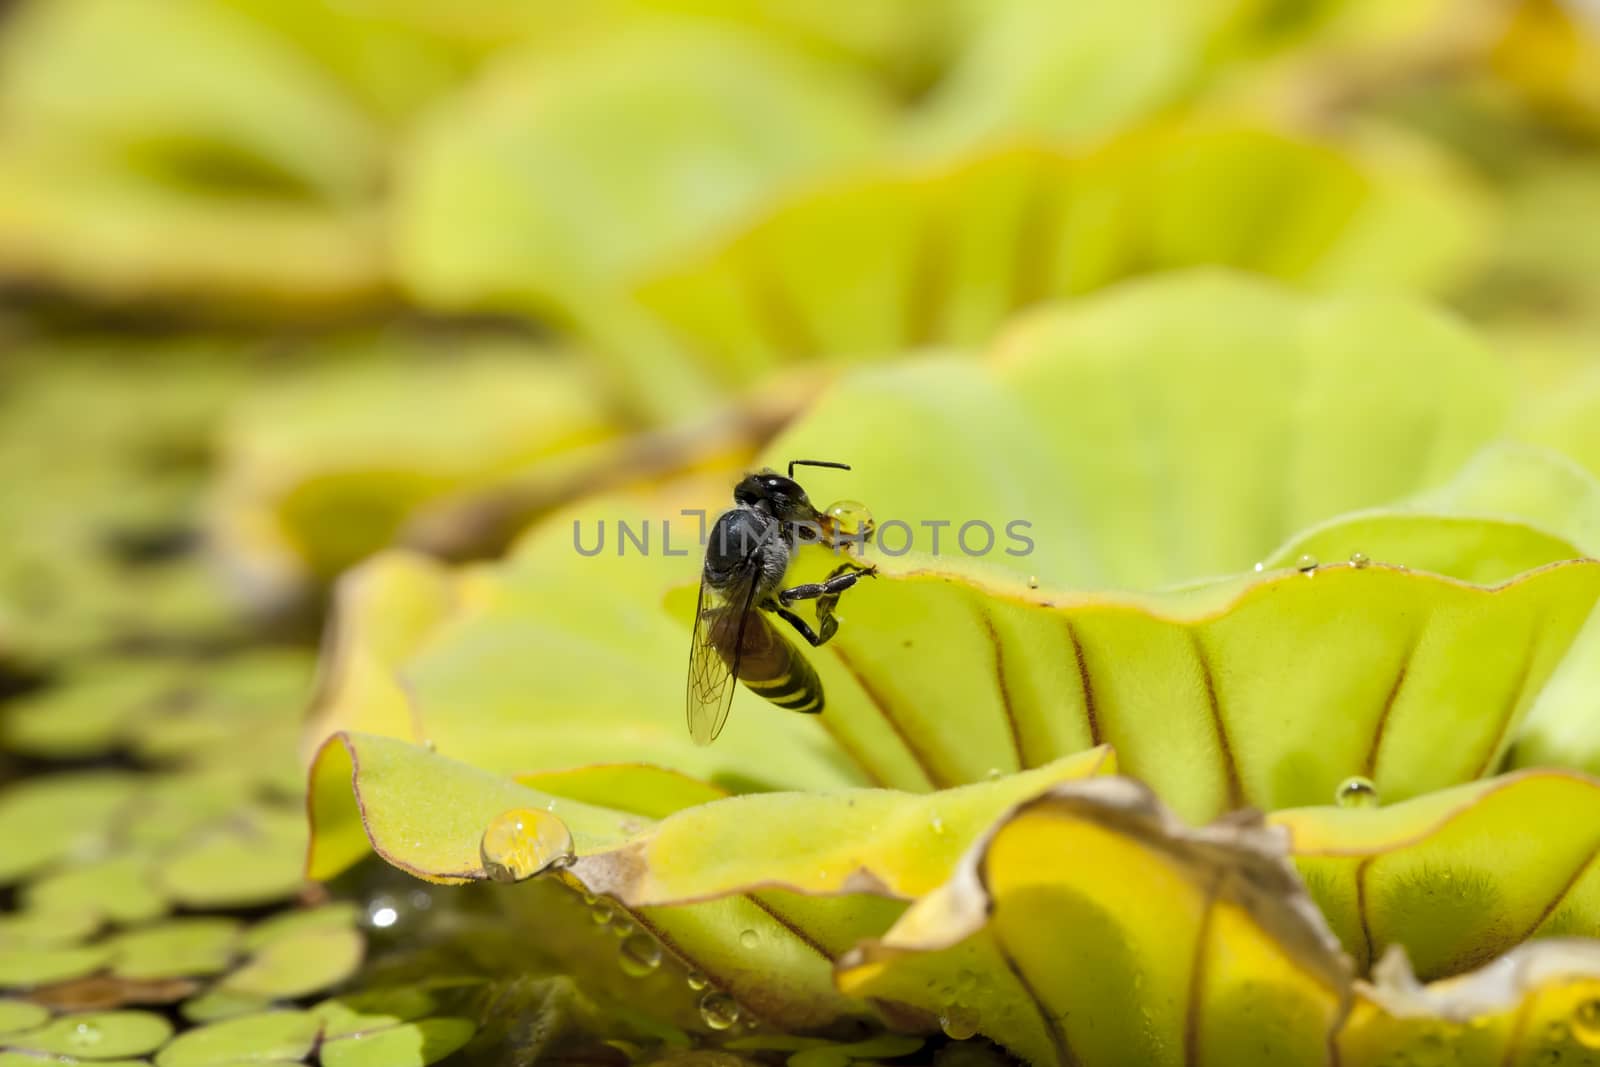 Bees are fed on  green floating water lettuce